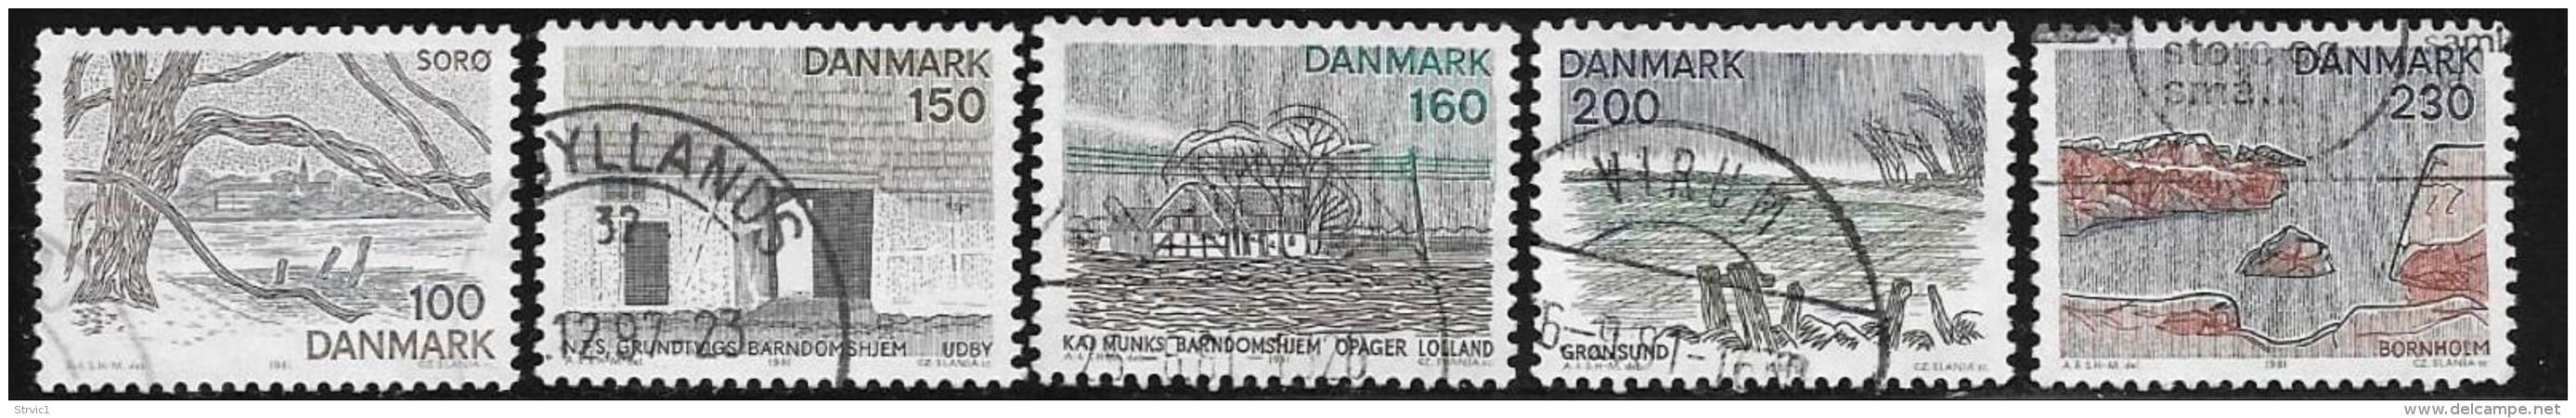 Denmark, Scott # 682-6 Used Zealand Views, 1981 - Used Stamps